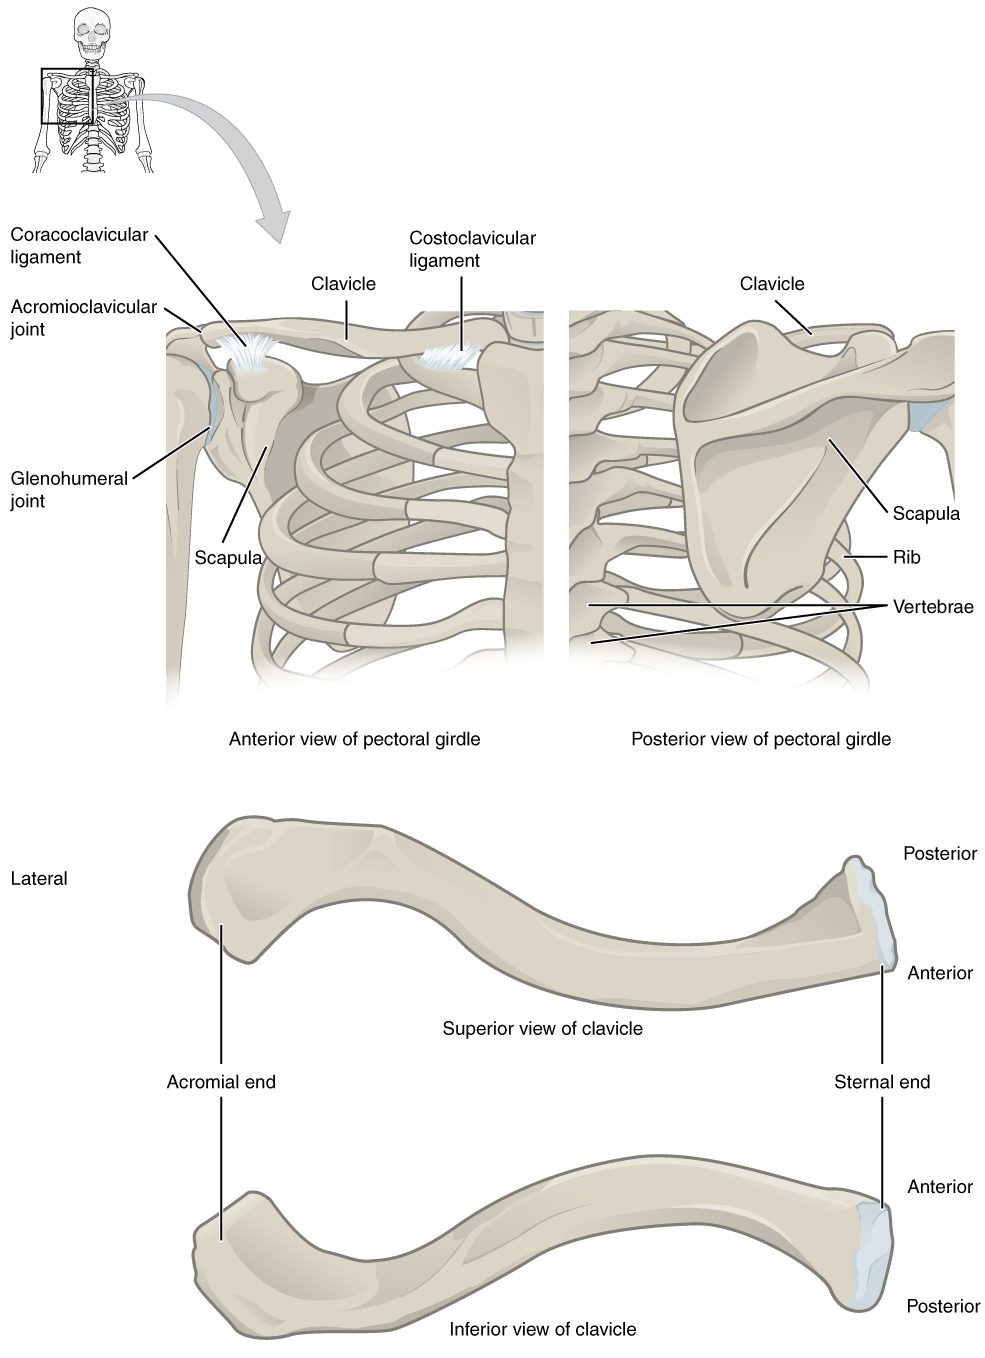 This figure shows the rib change. The top left panel shows the anterior